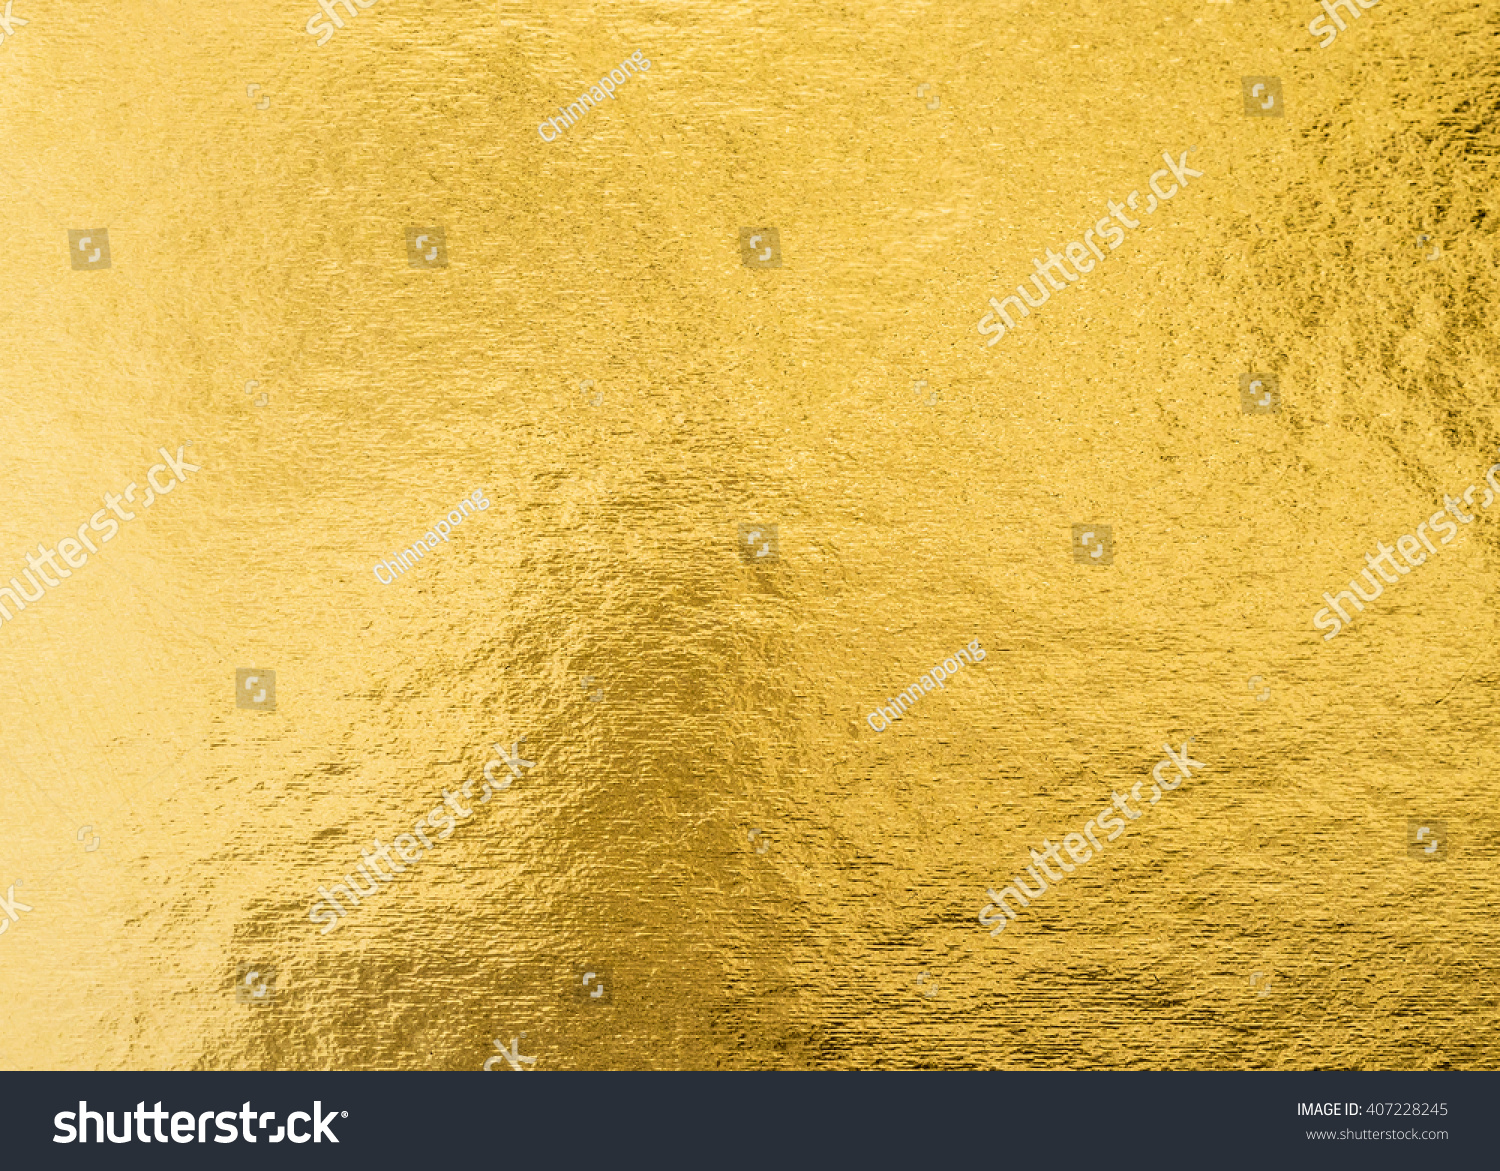 Gold foil leaf shiny wrapping paper texture background for wall paper decoration element #407228245